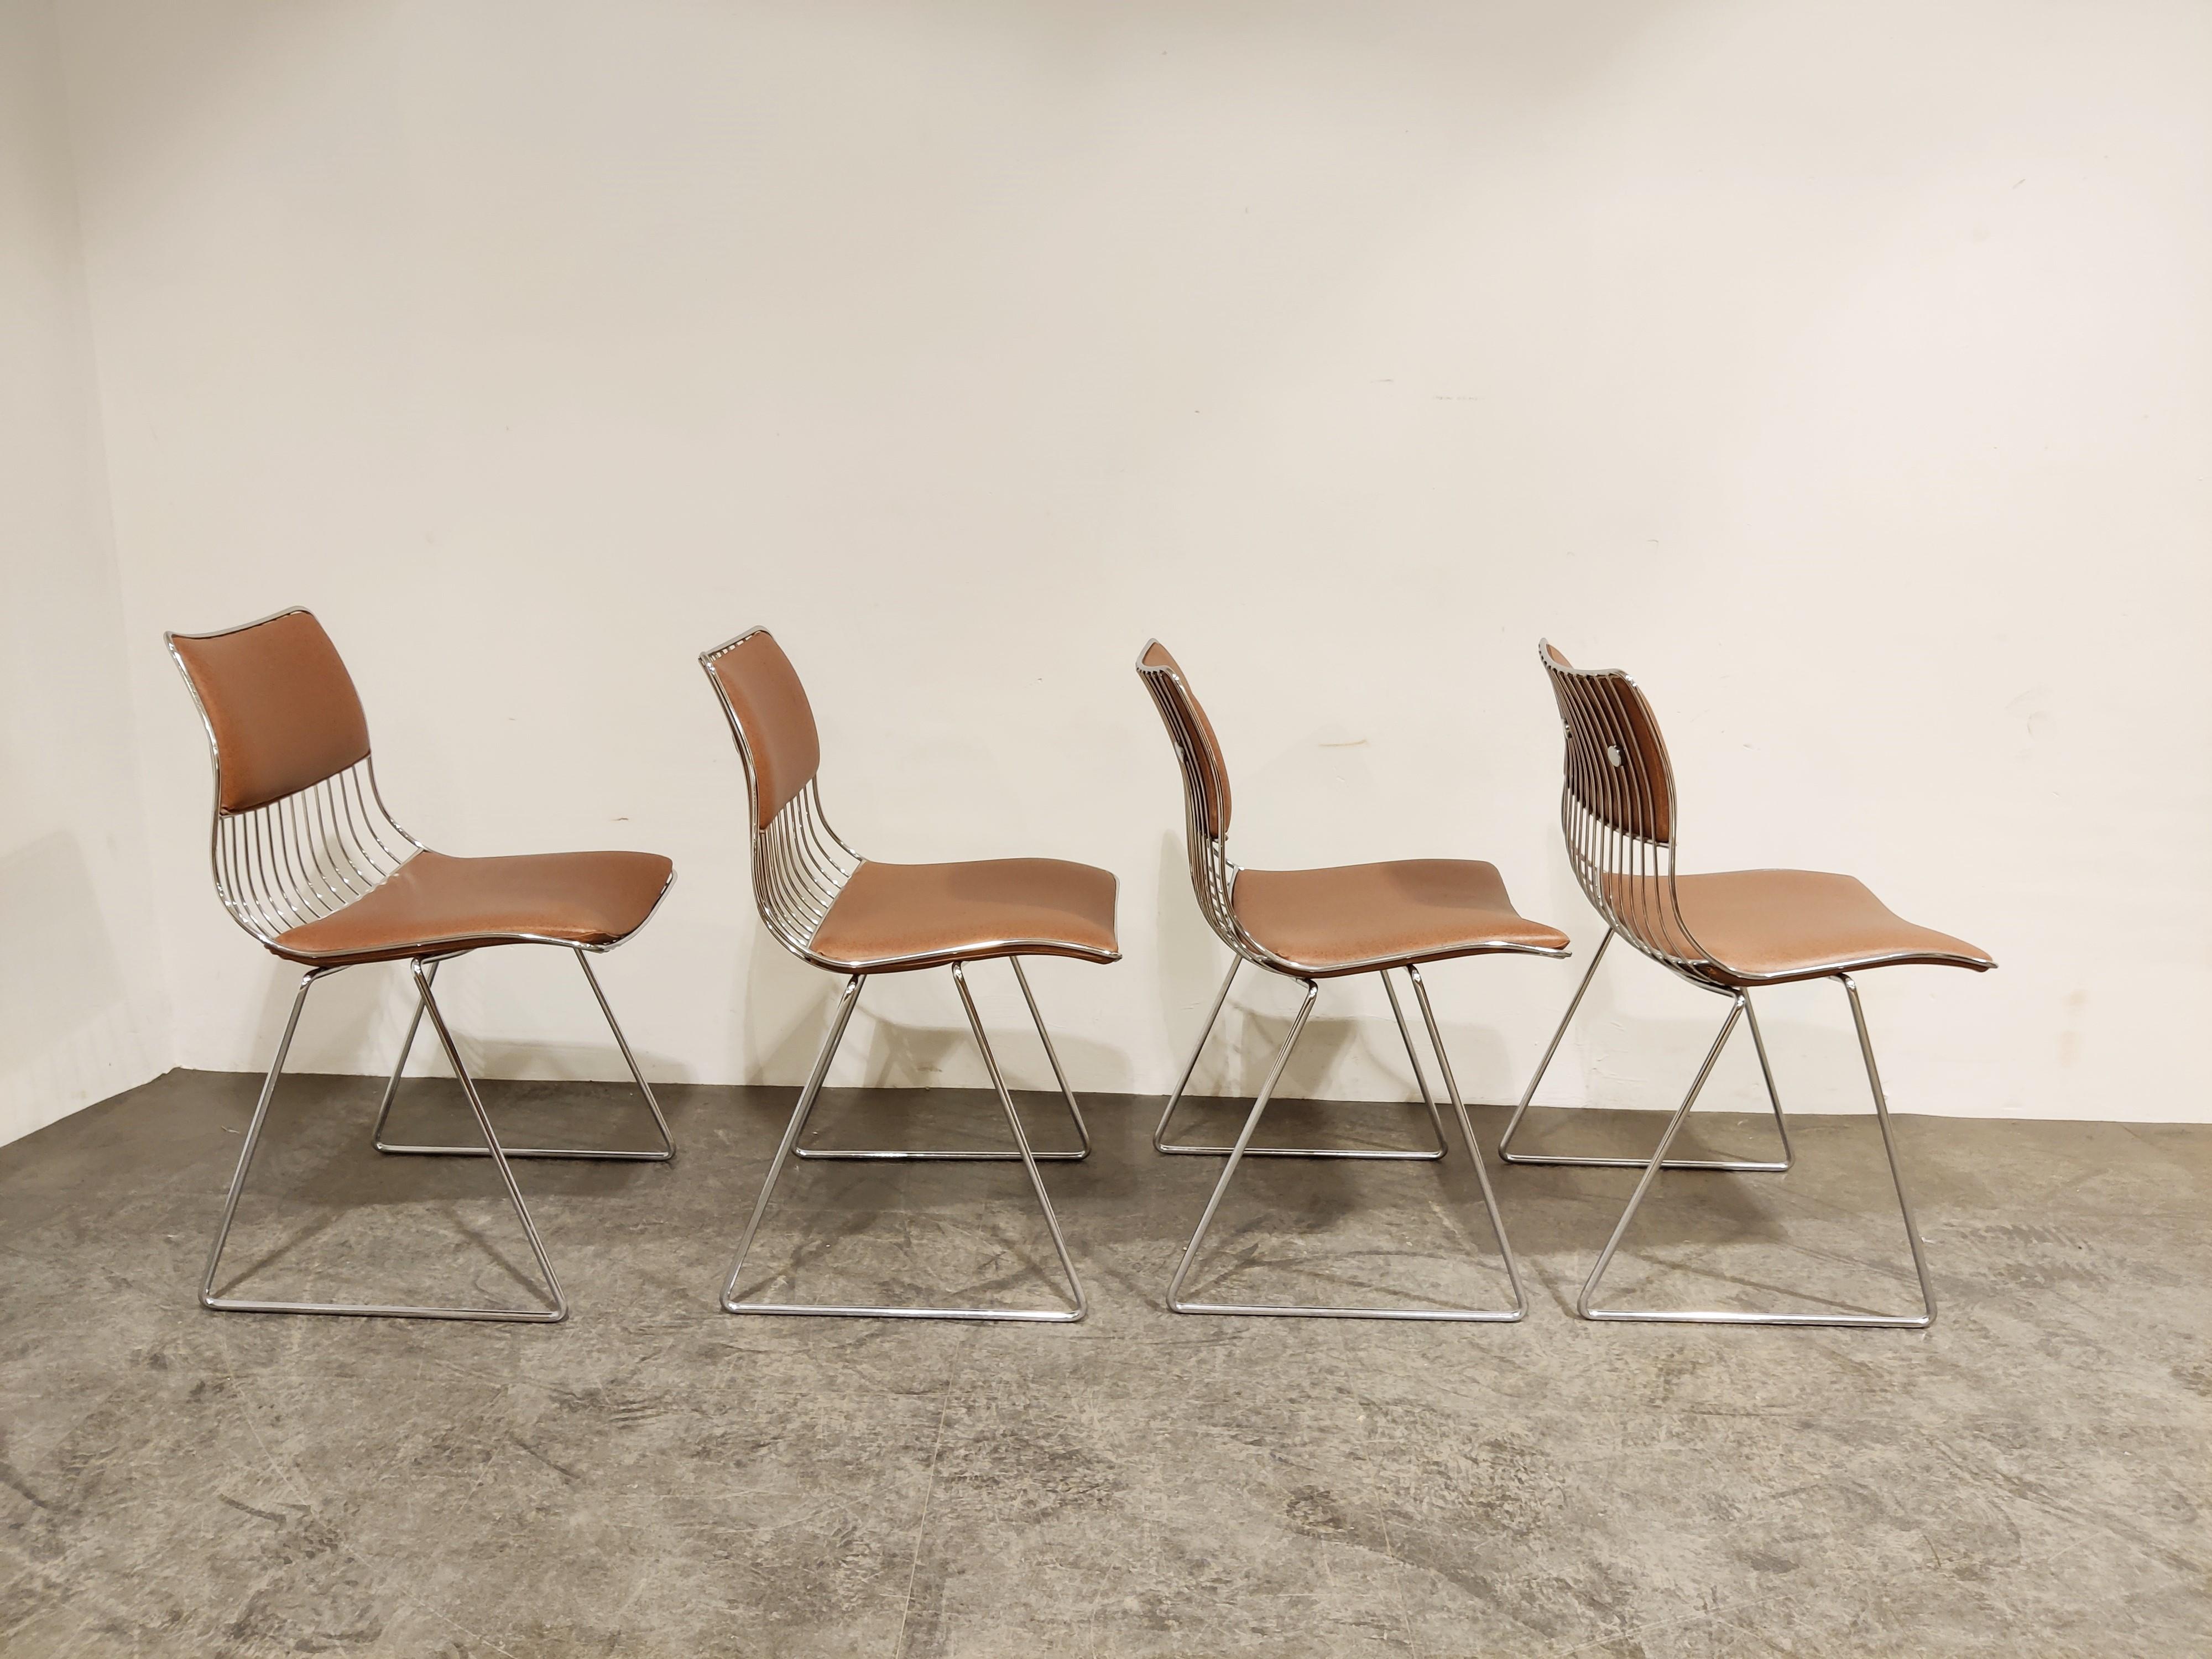 Late 20th Century Set of 4 Dining Chairs by Rudi Verelst for Novalux, 1970s